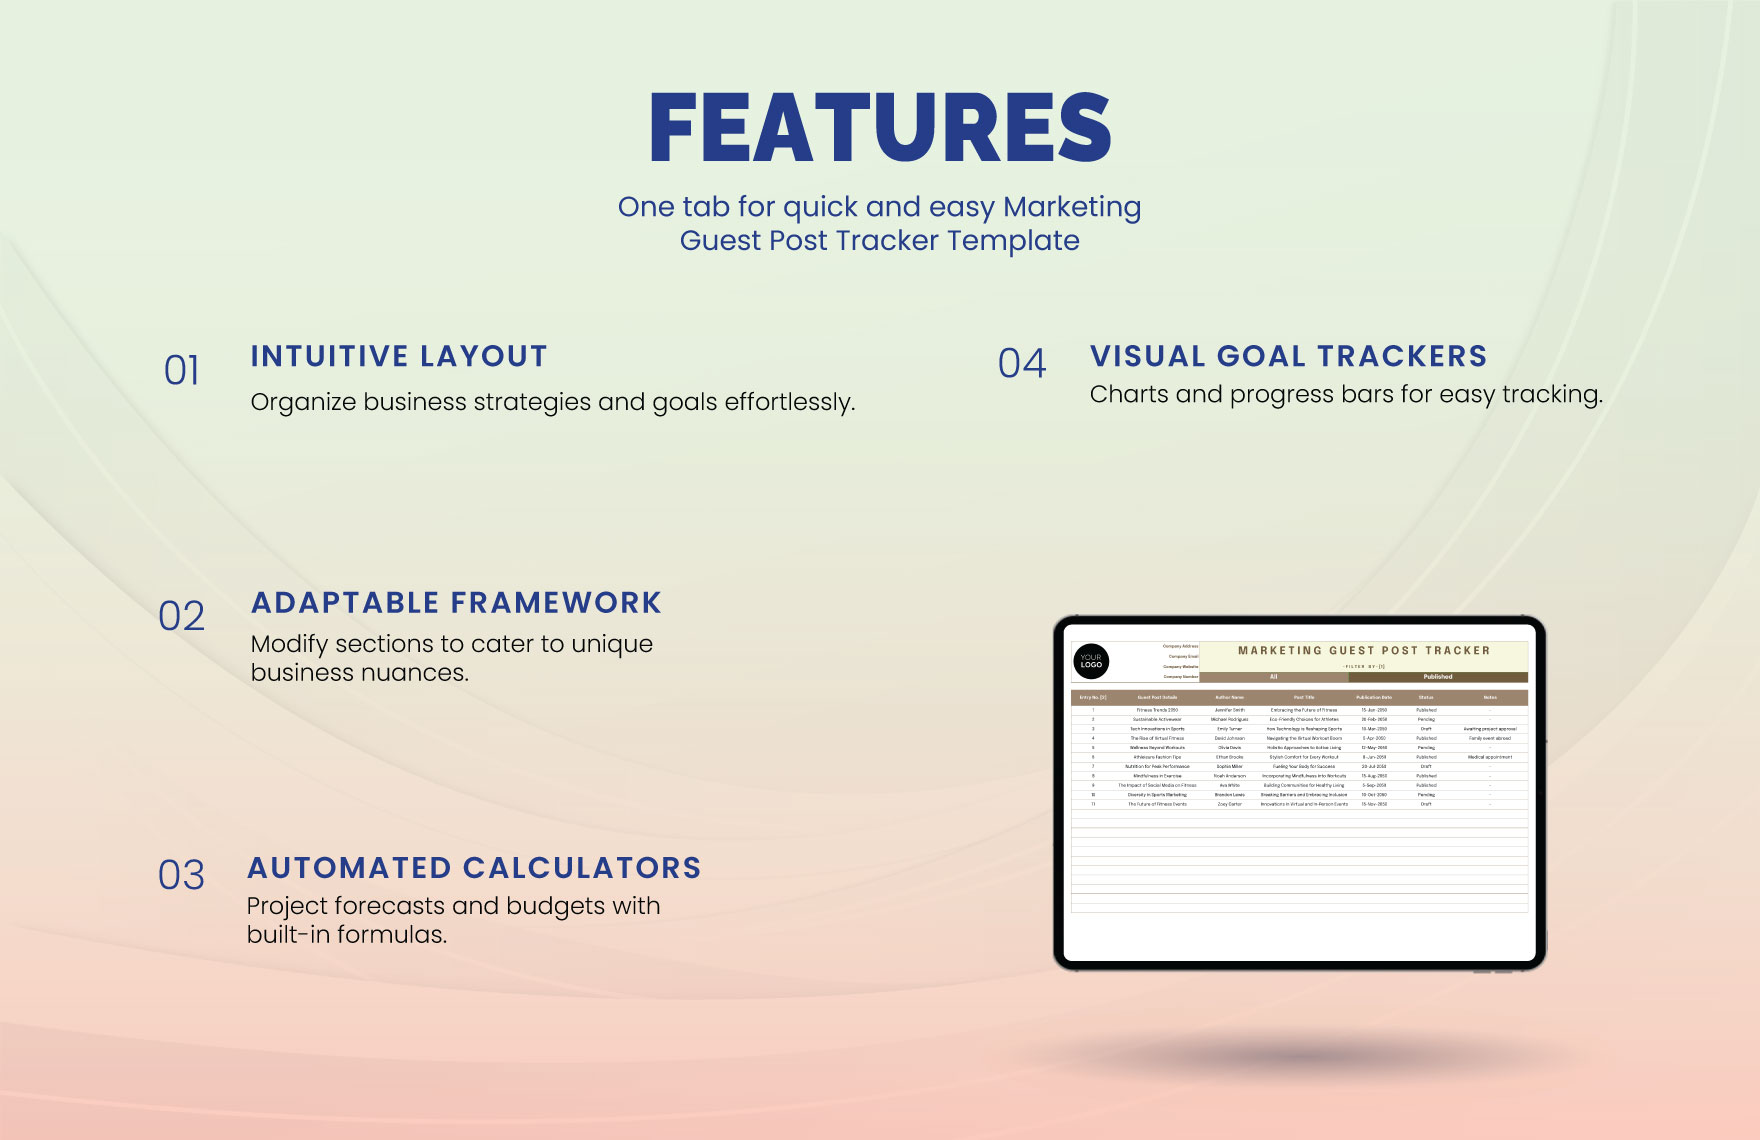 Marketing Guest Post Tracker Template